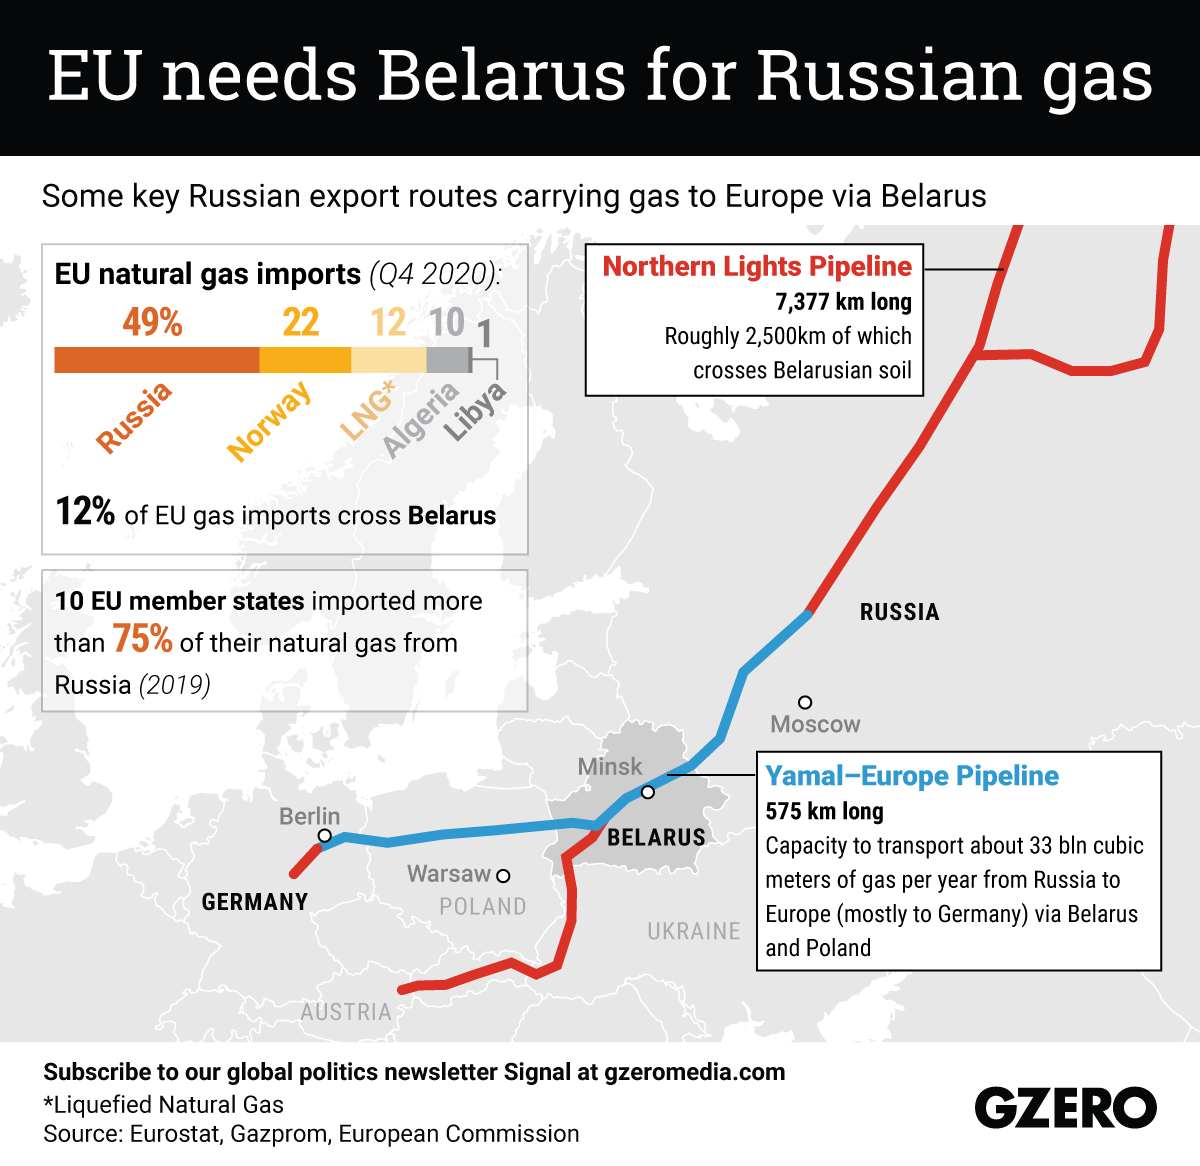 The Graphic Truth: EU needs Belarus for Russian gas